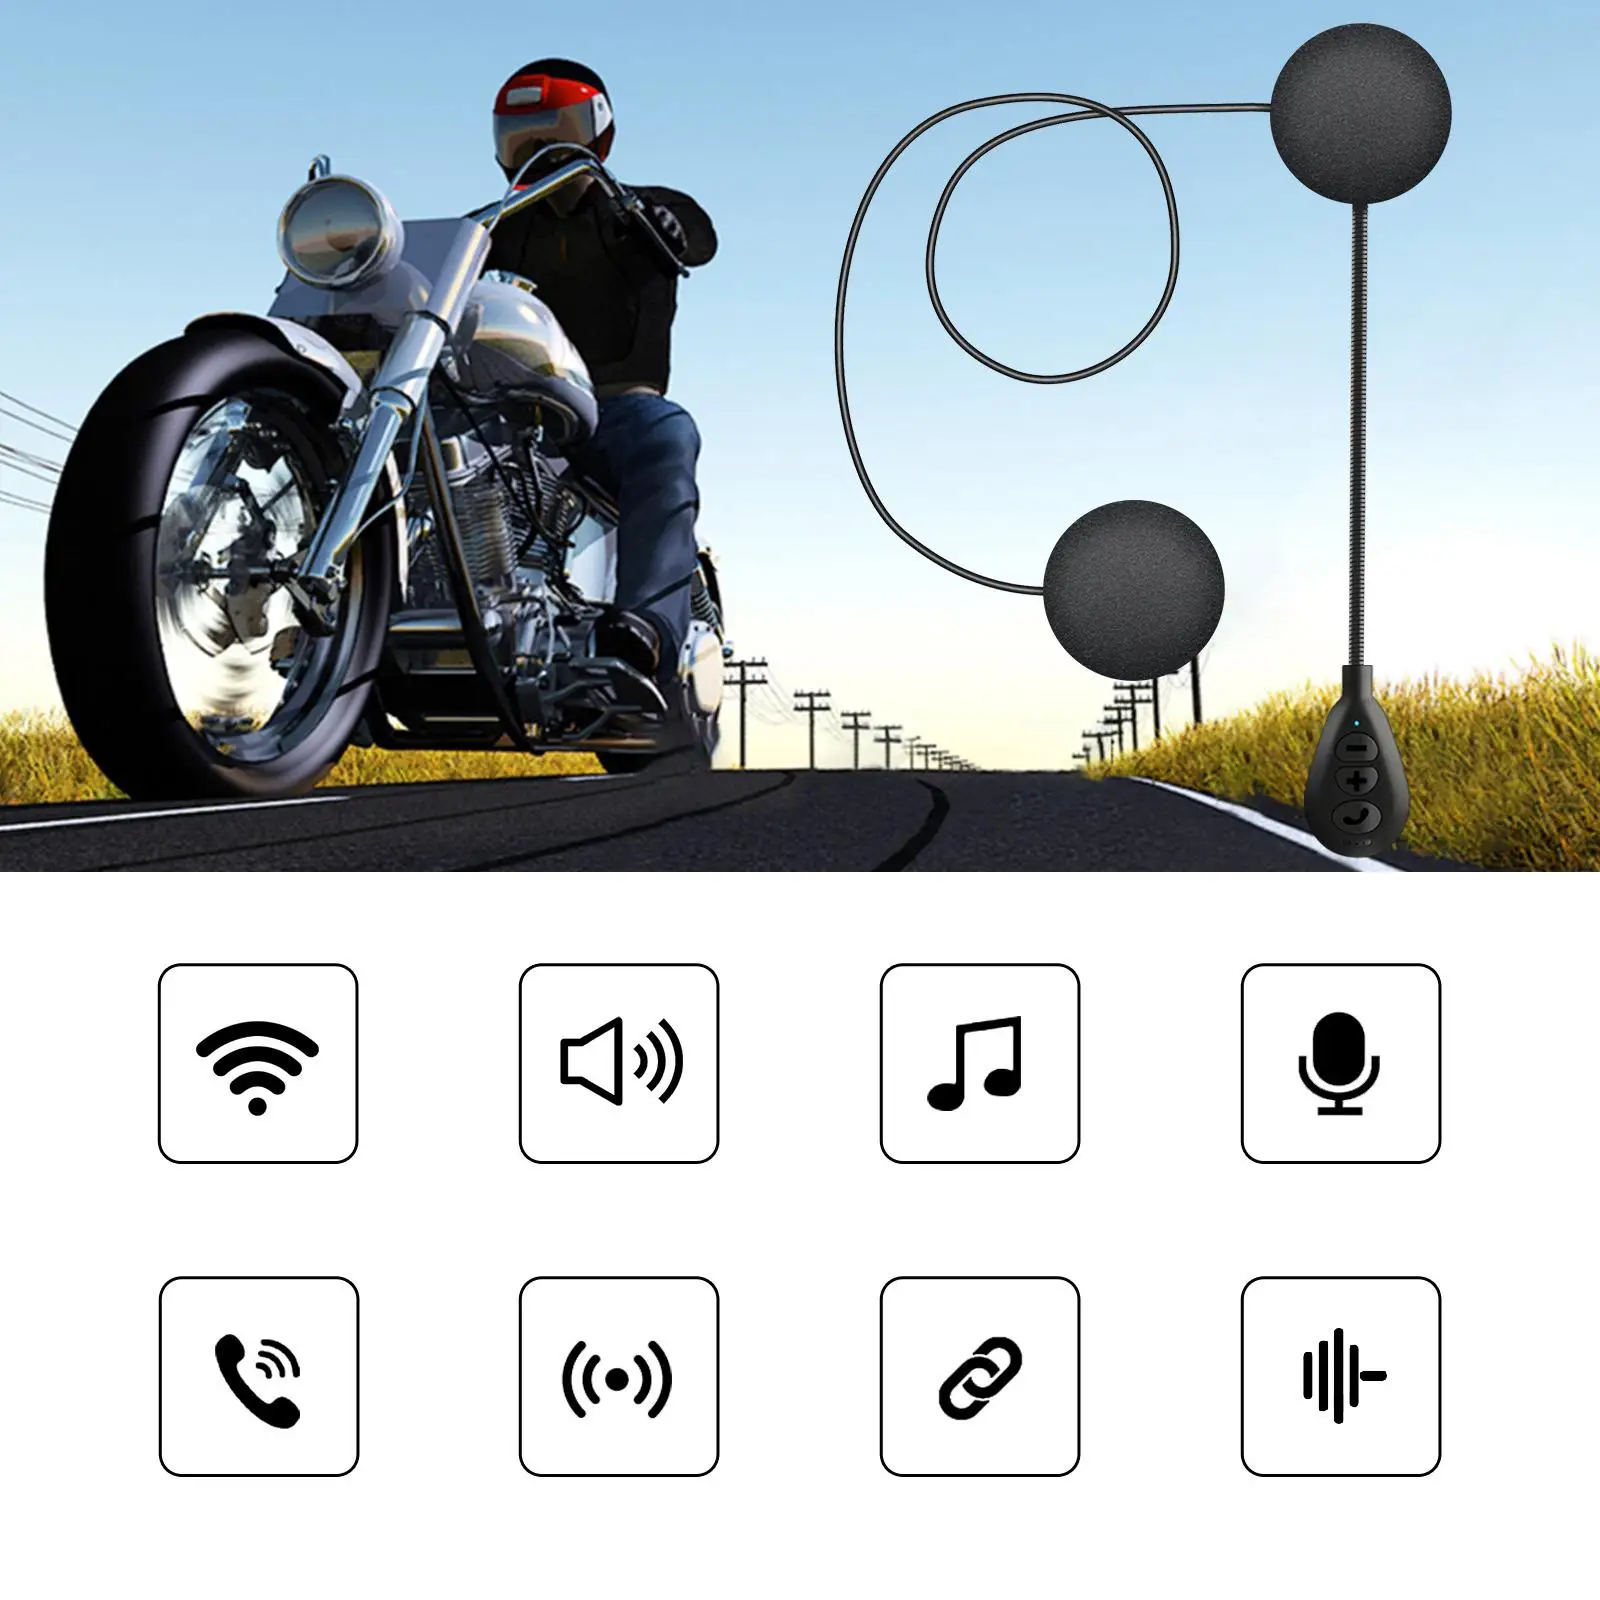 Motorcycle Bluetooth Helmet Headset Auto Answer Incoming Calls Wireless Noise Cancelling 5.0 Handsfree Headphone for Riding